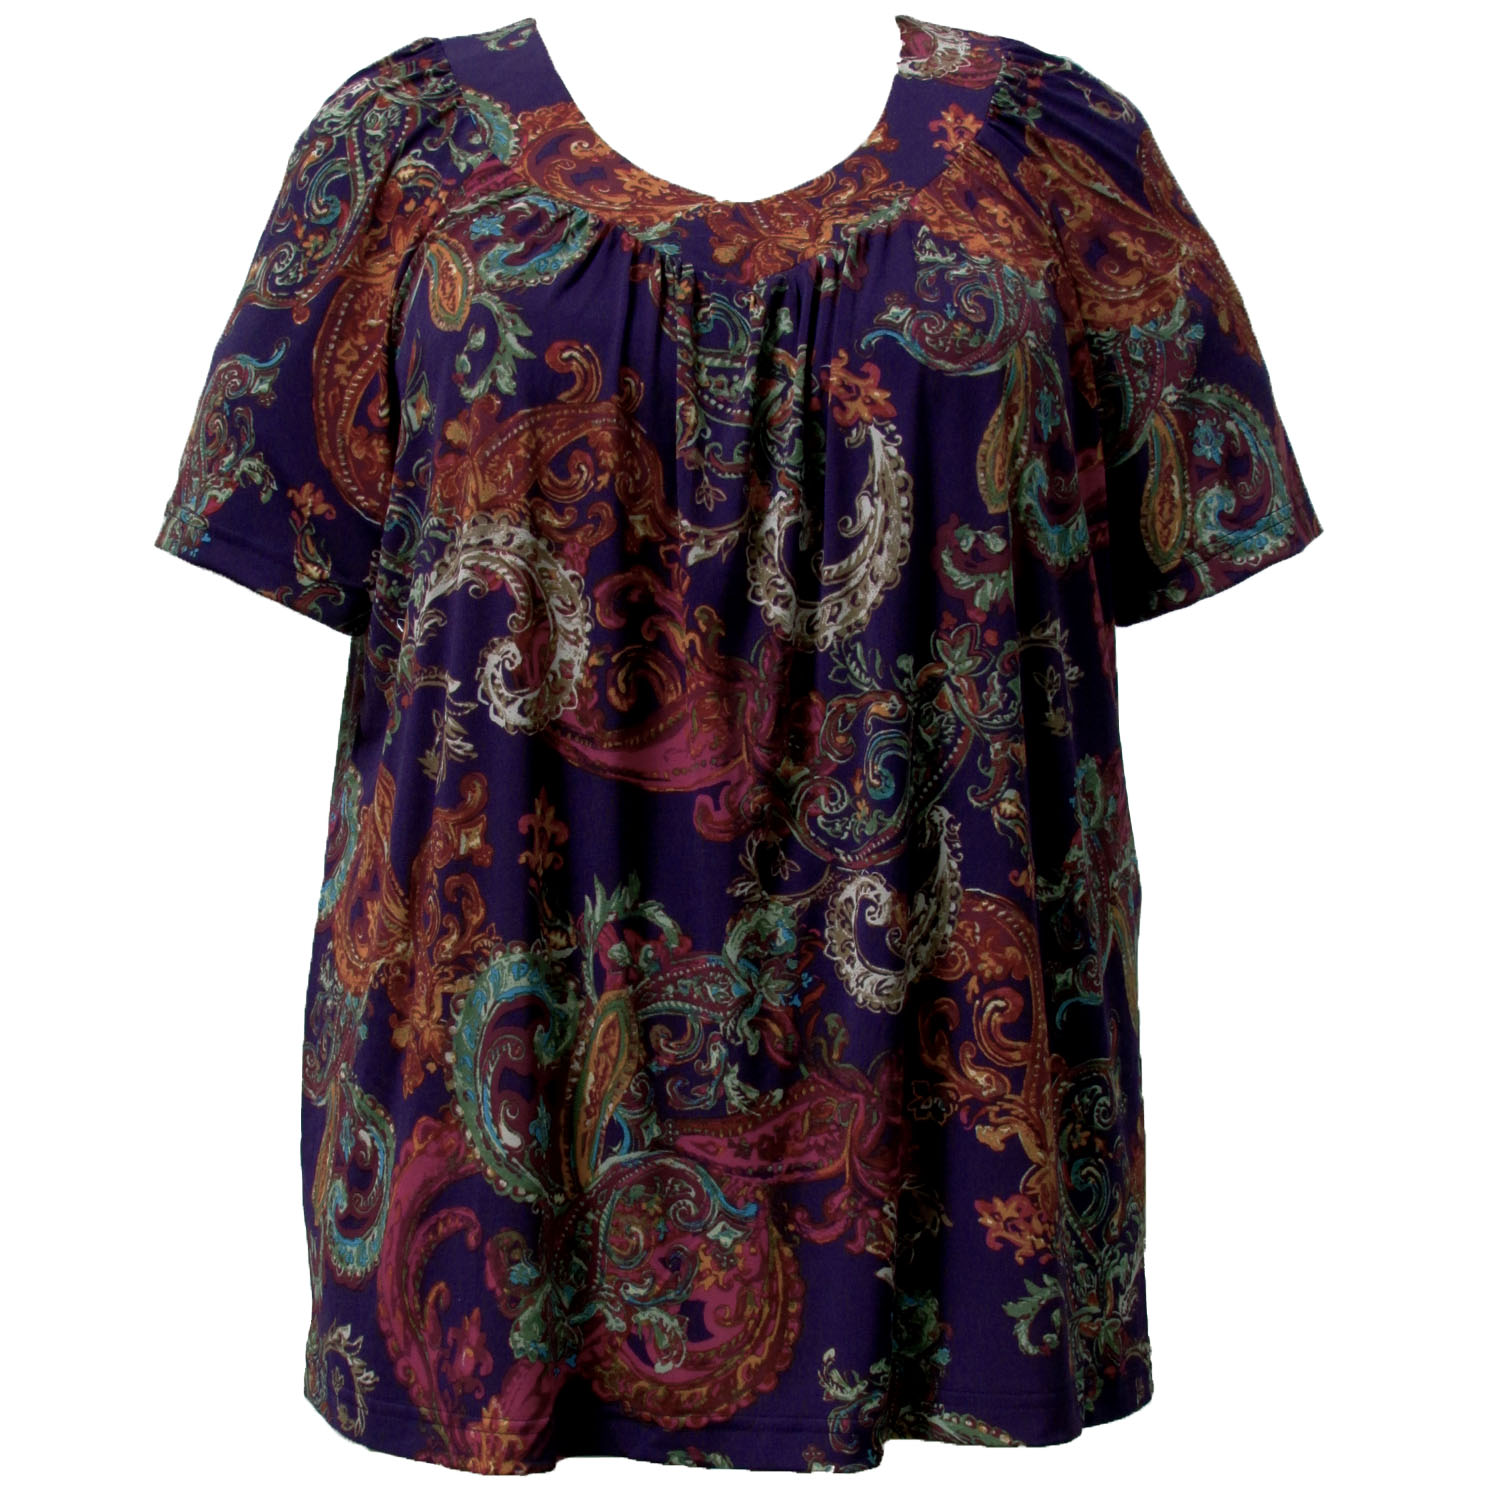 A Personal Touch Women's Plus Size Short Sleeve V-Neck Pullover Top - Purple Regal Paisley